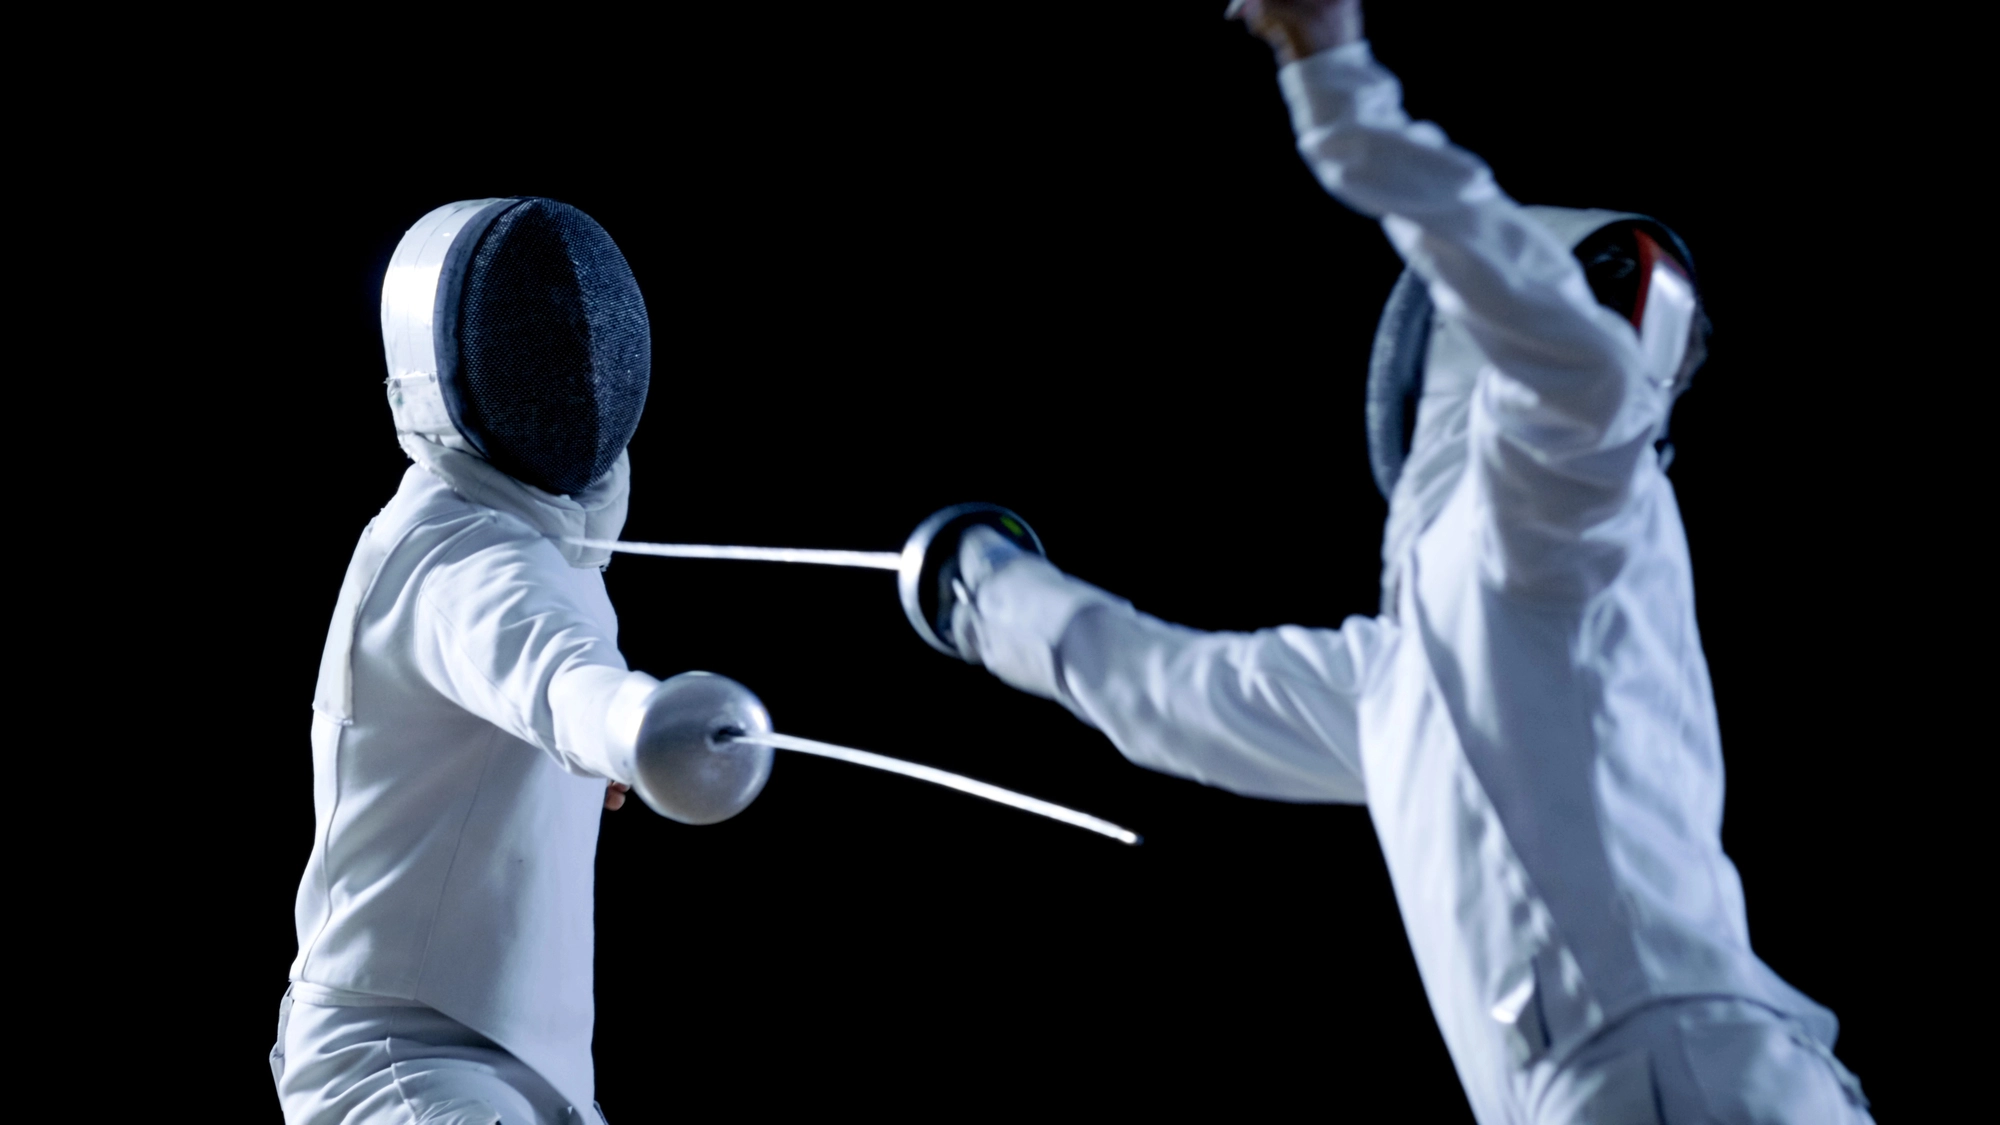 Foil Fencers in a duel.